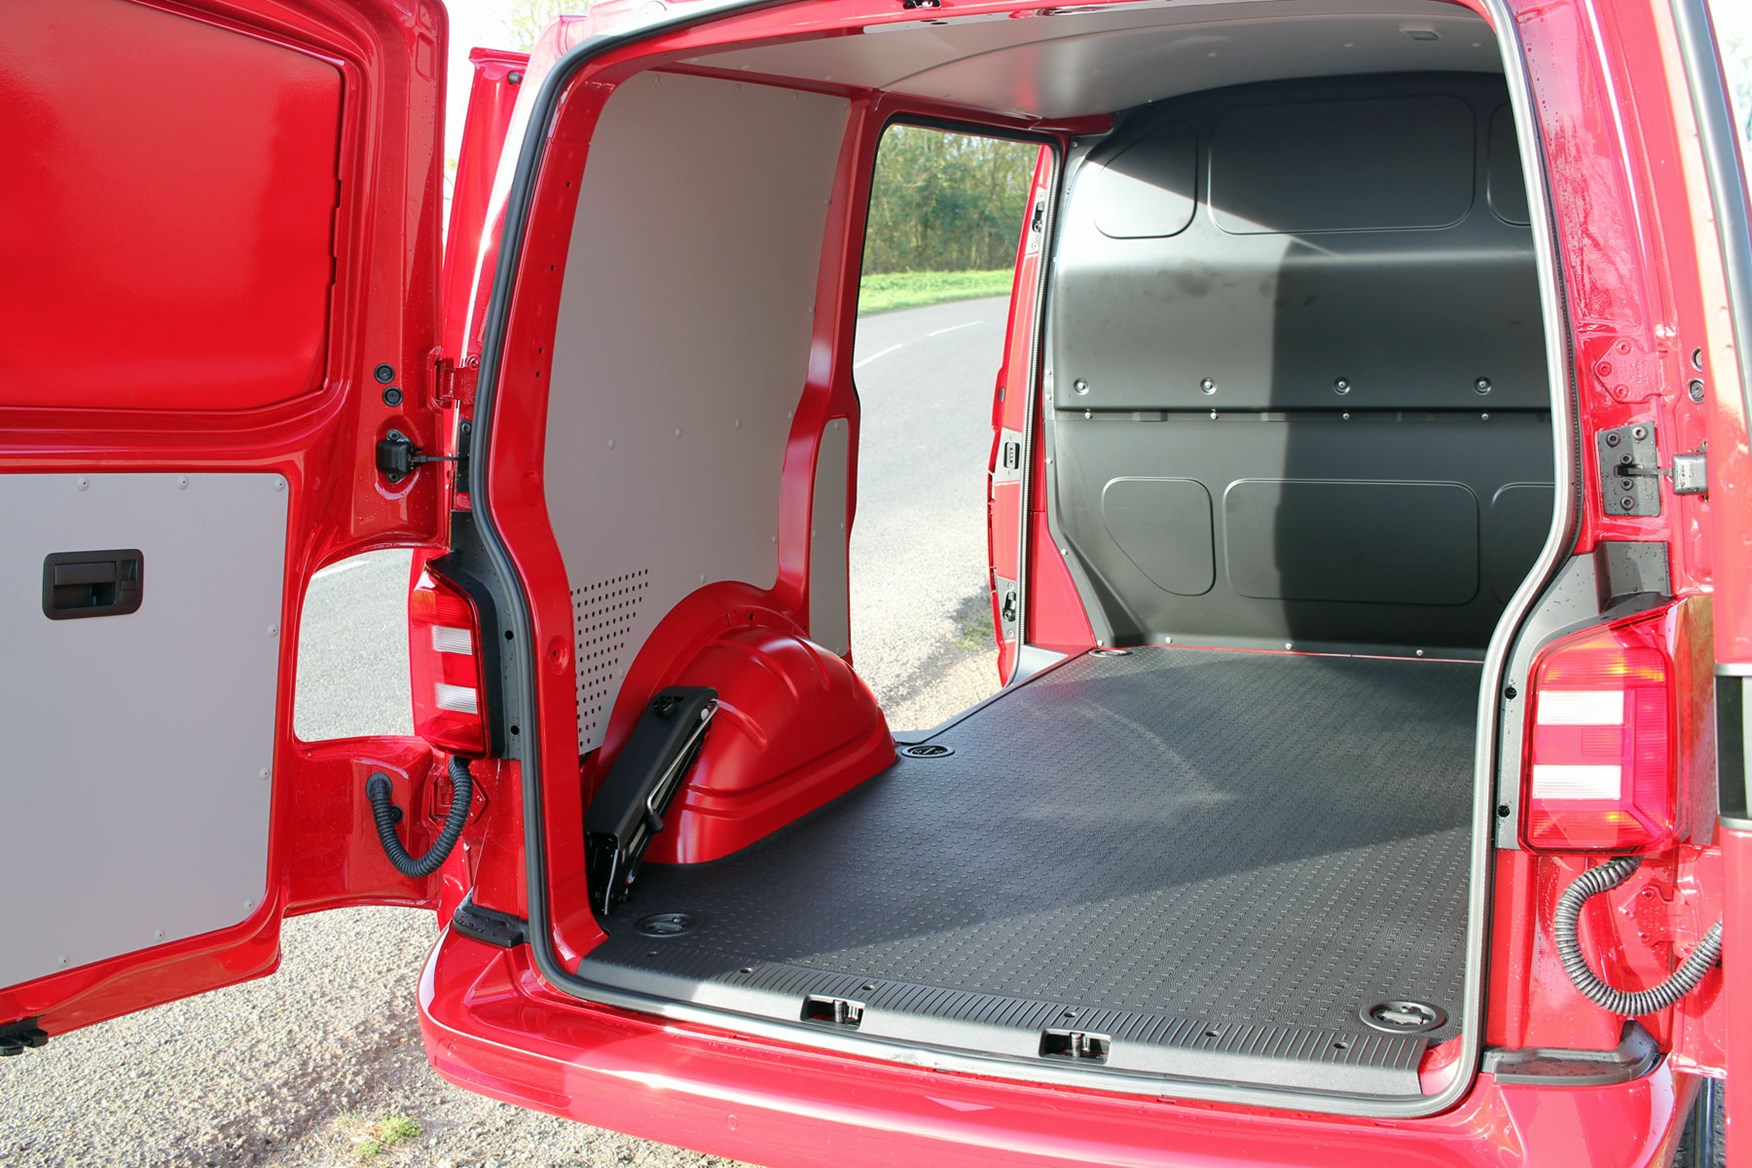 VW Transporter T6 TSI 150 review - load area, payload